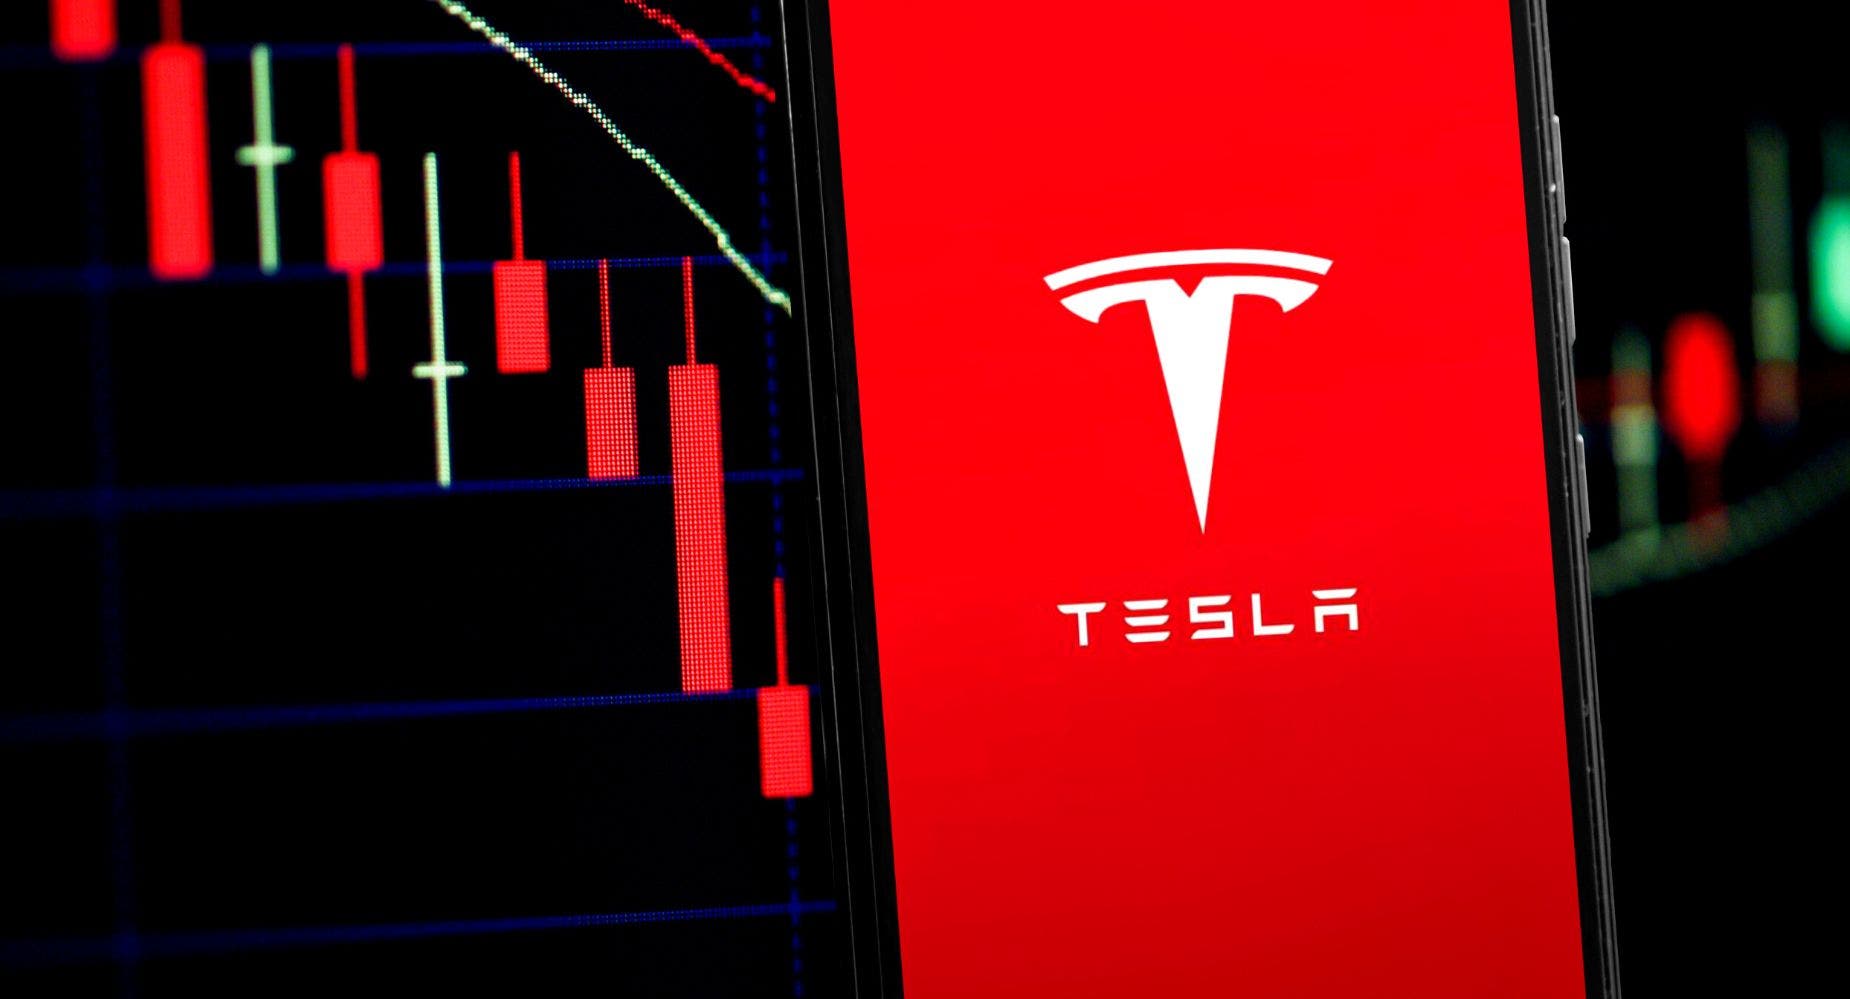 Tesla Will Have A 'Knockdown' 2023, But This Vehicle Alone Has Potential To Restart Delivery Growth: Analyst